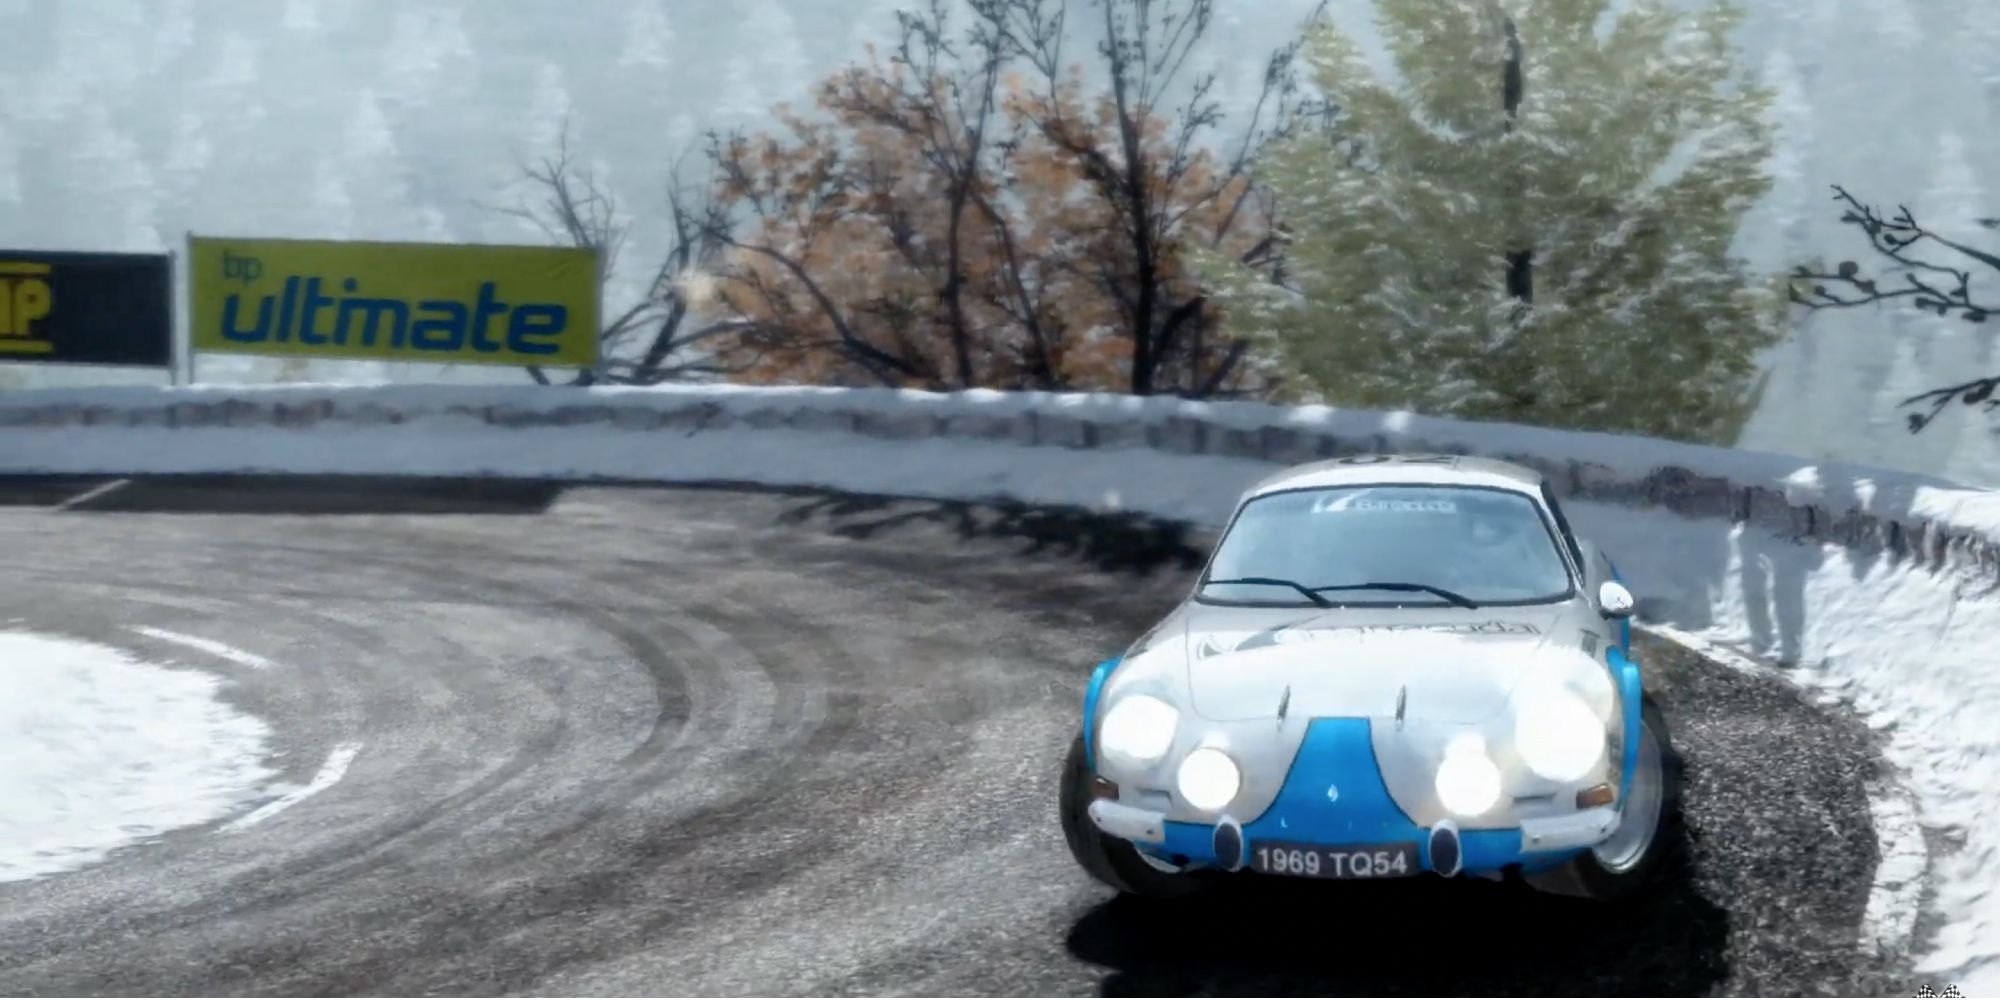 Realistic Racing Games -DiRT Rally - Renault Alpine A110 taking a turn in snow covered streets